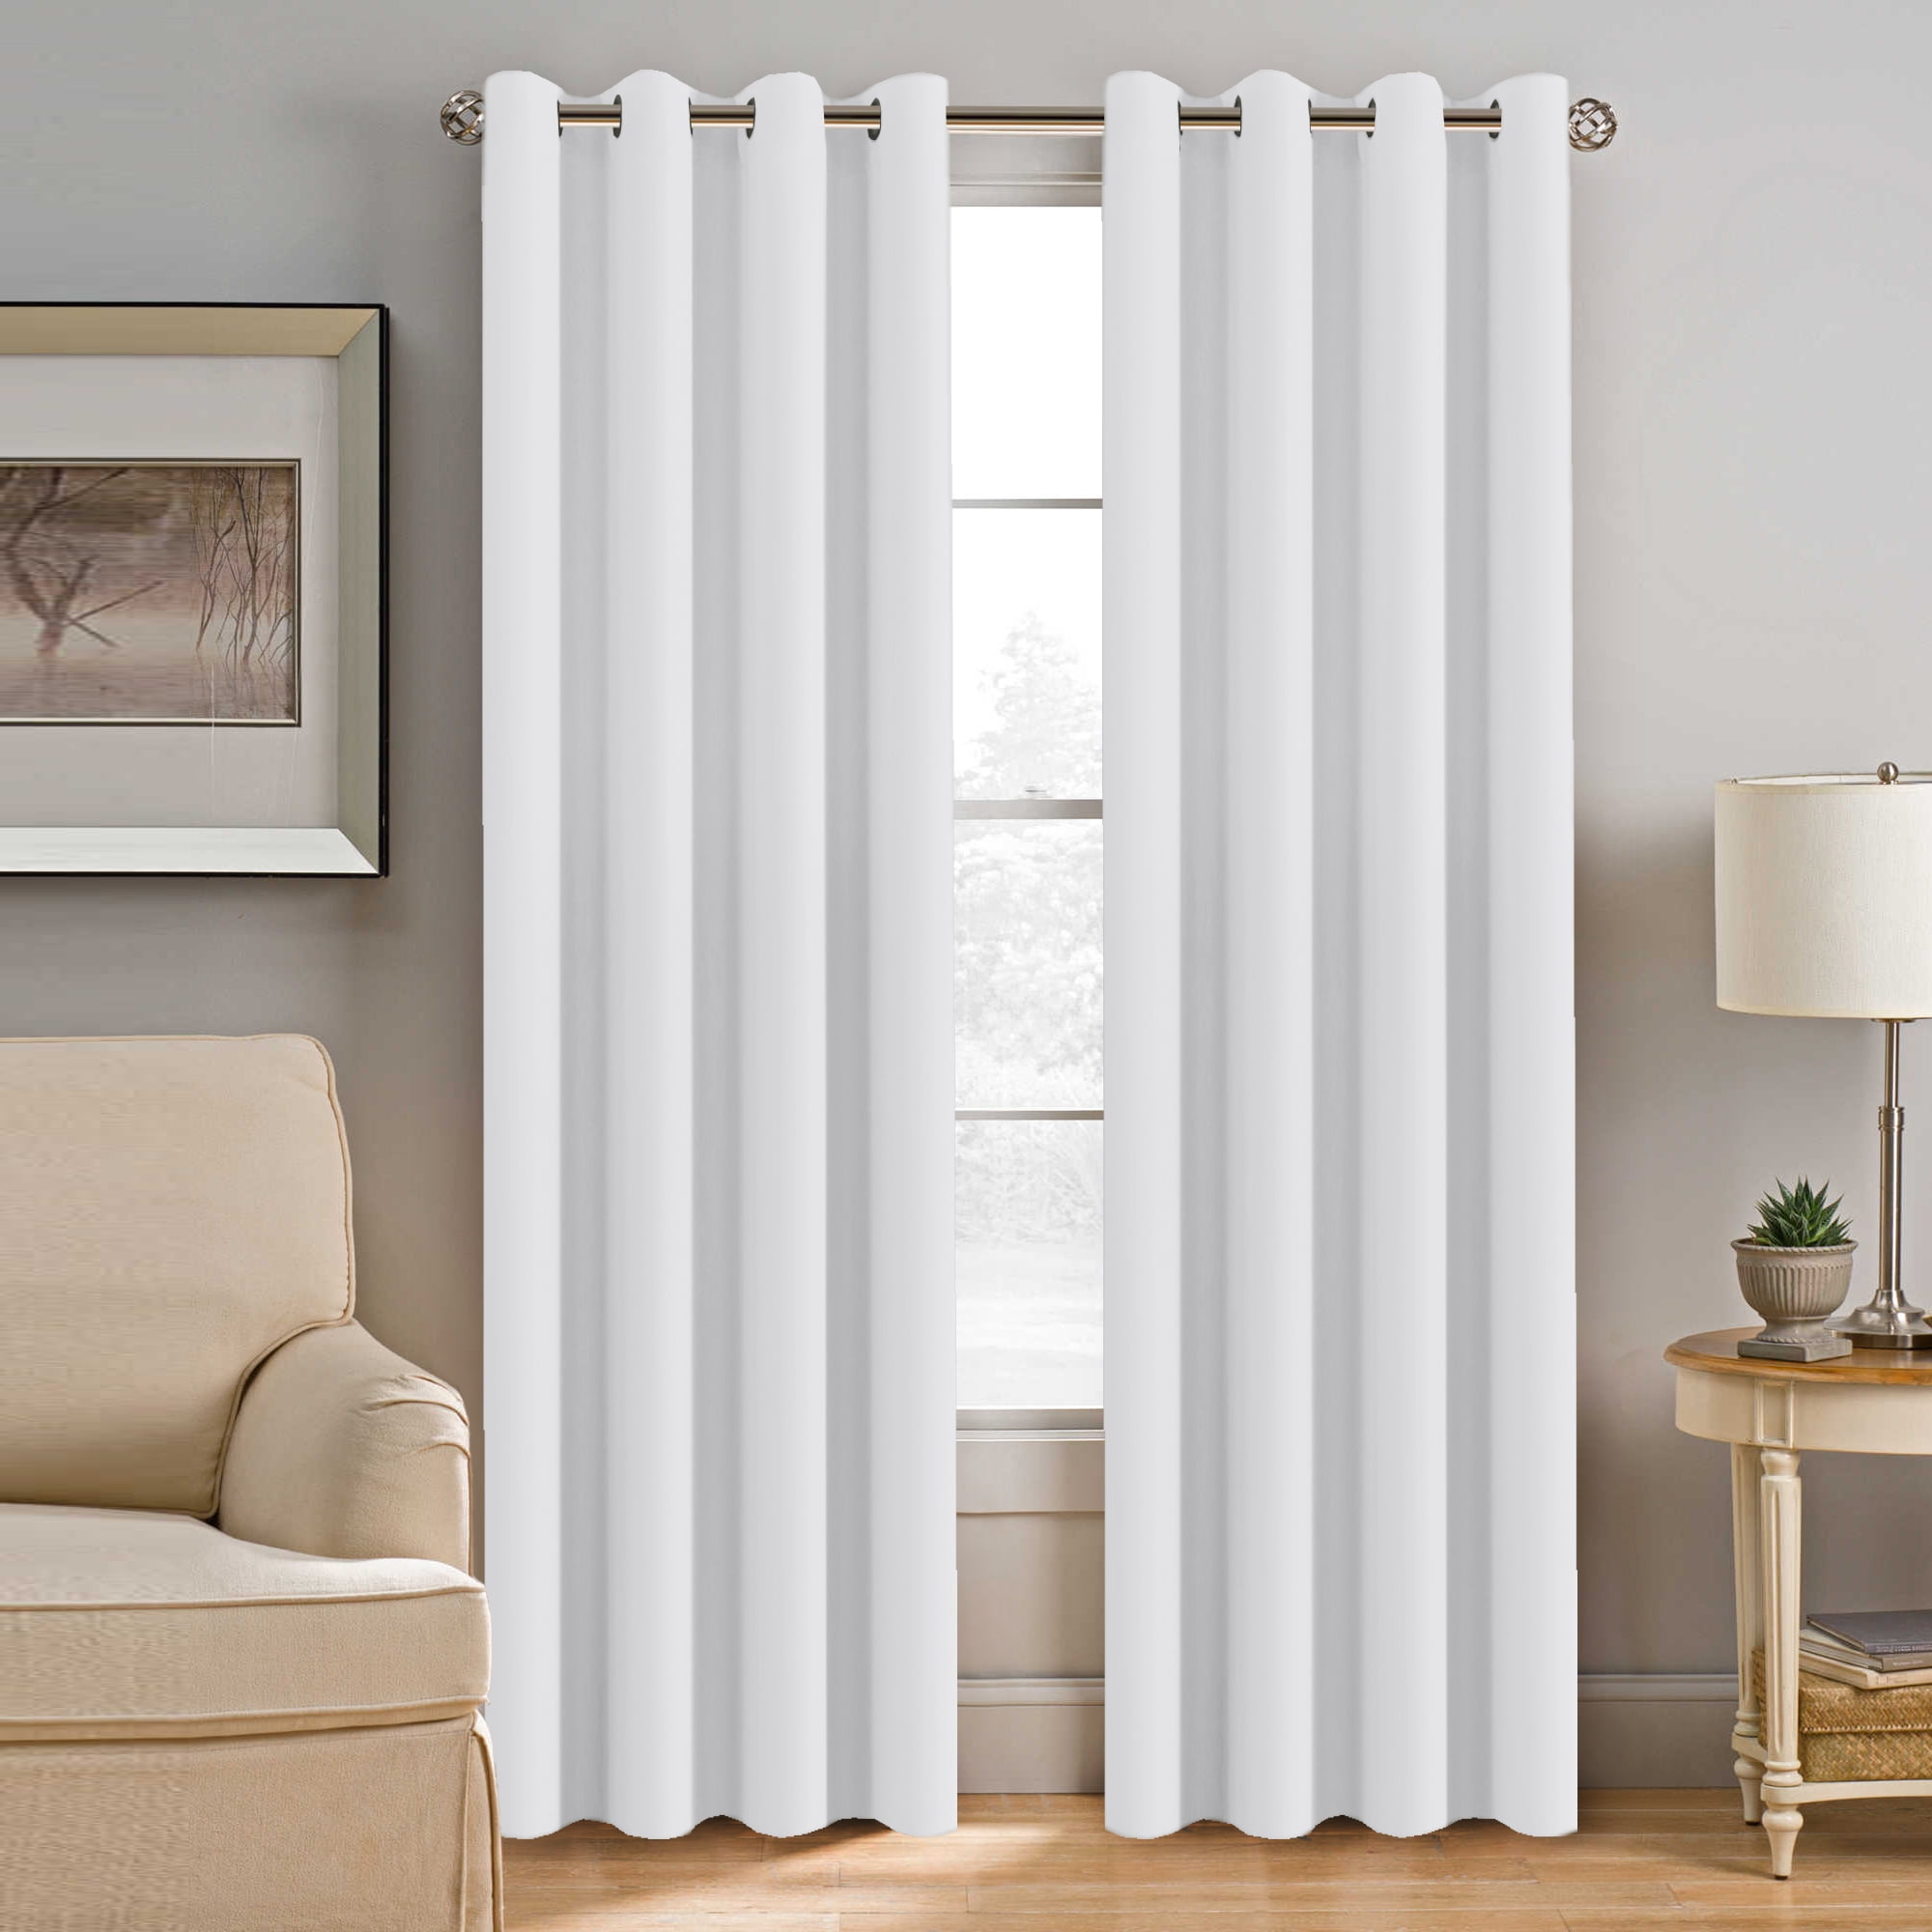 Thermal Insulated Grommet Curtain D, Images Of White Curtains In Living Room